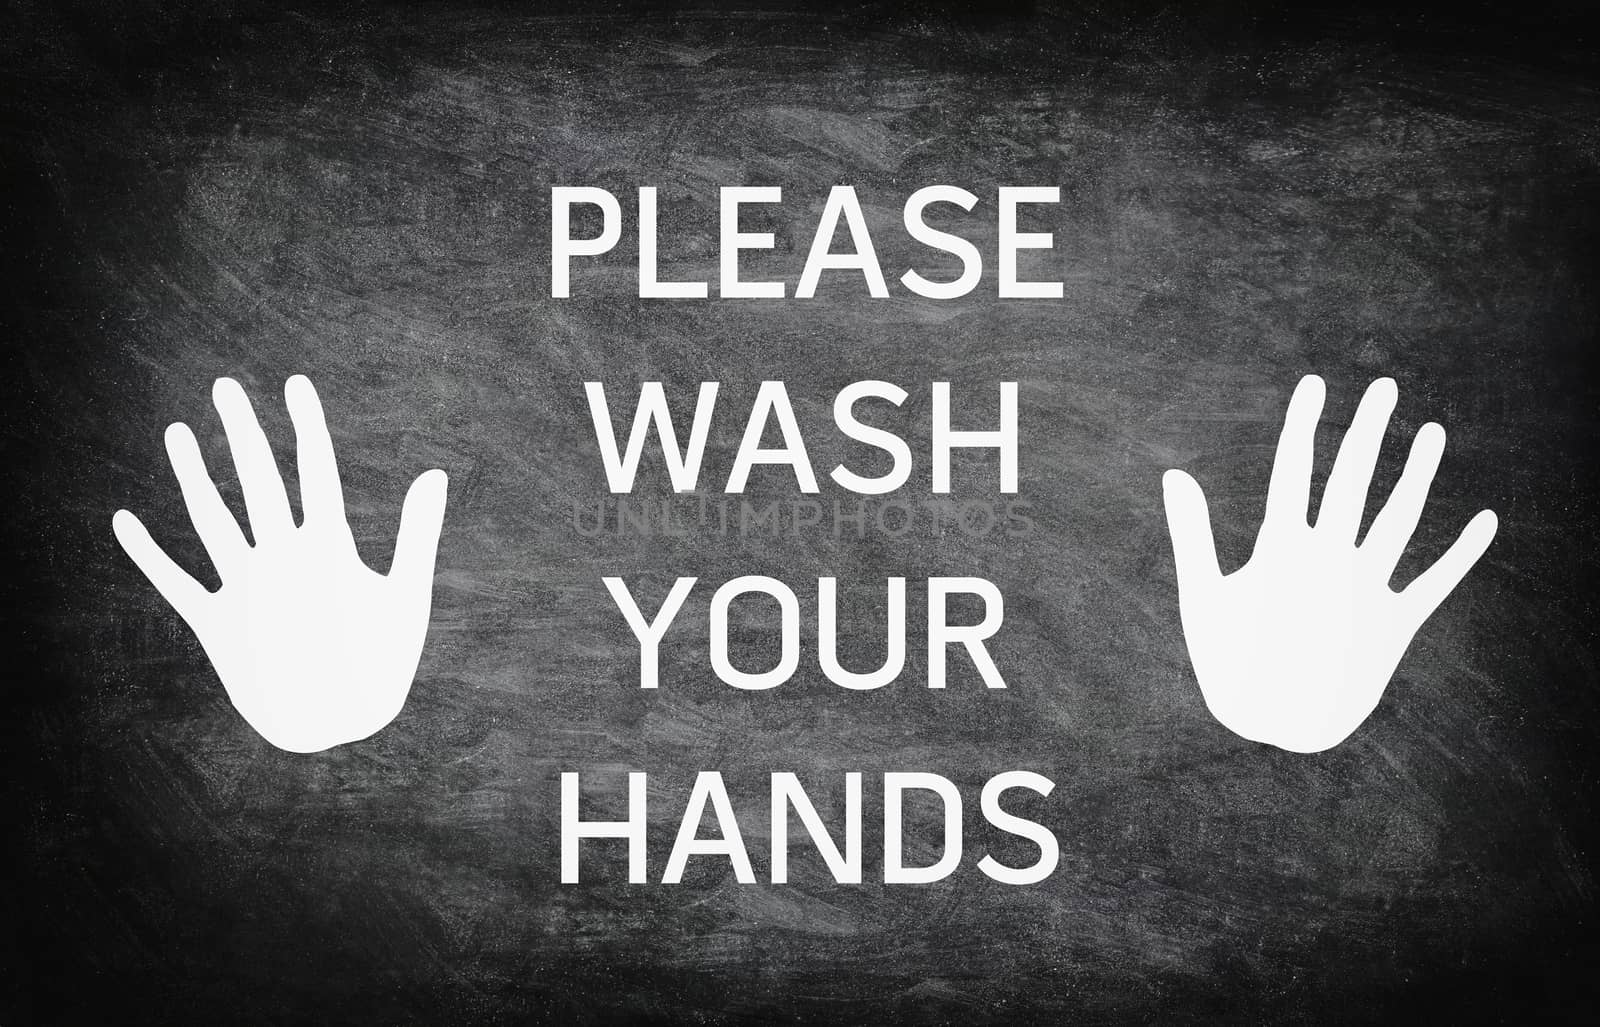 Please wash your hands notice warning at entrance sign on blackboard. Hands icon for handwashing.